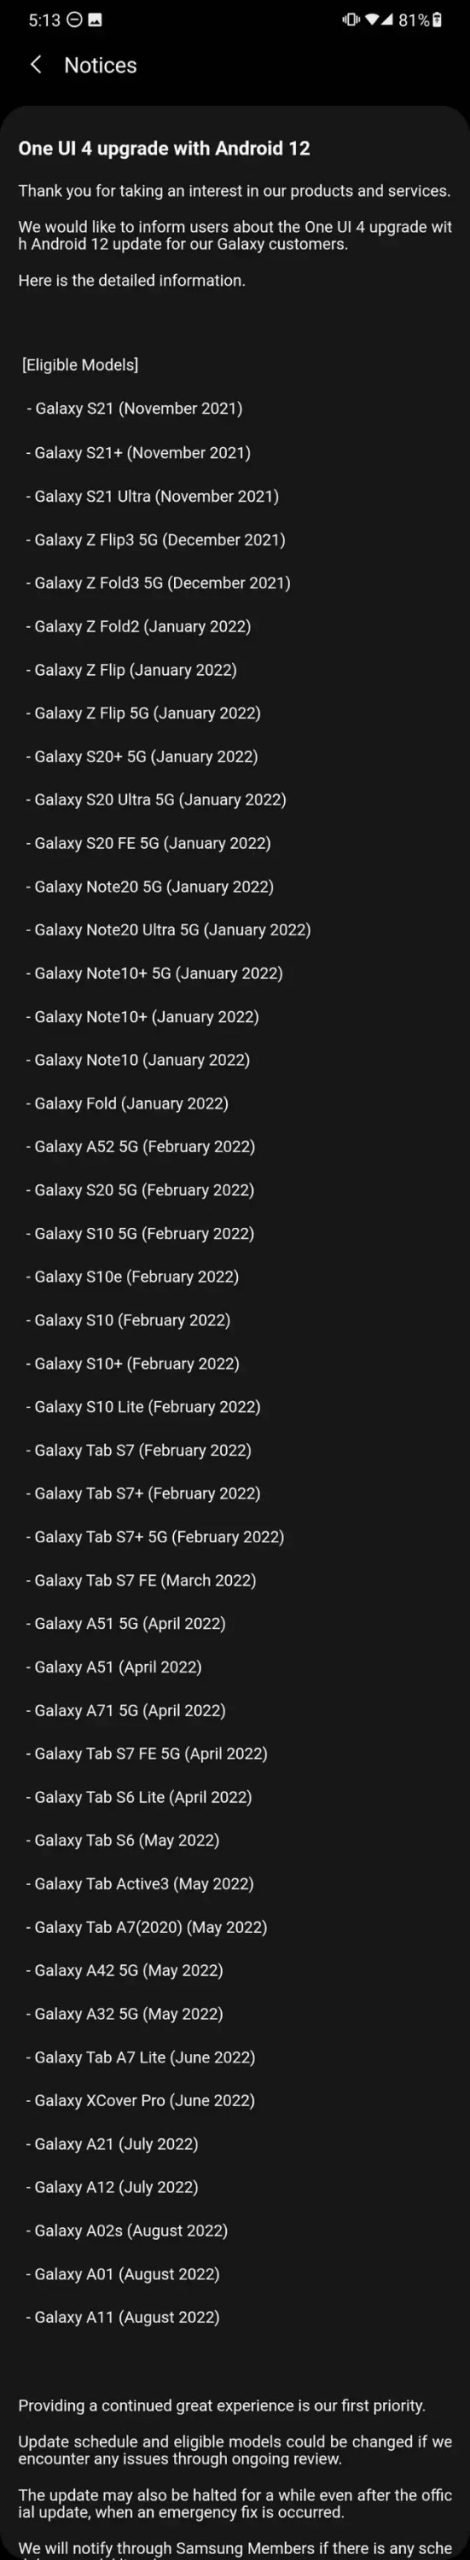 Official Android 12 Roadmap